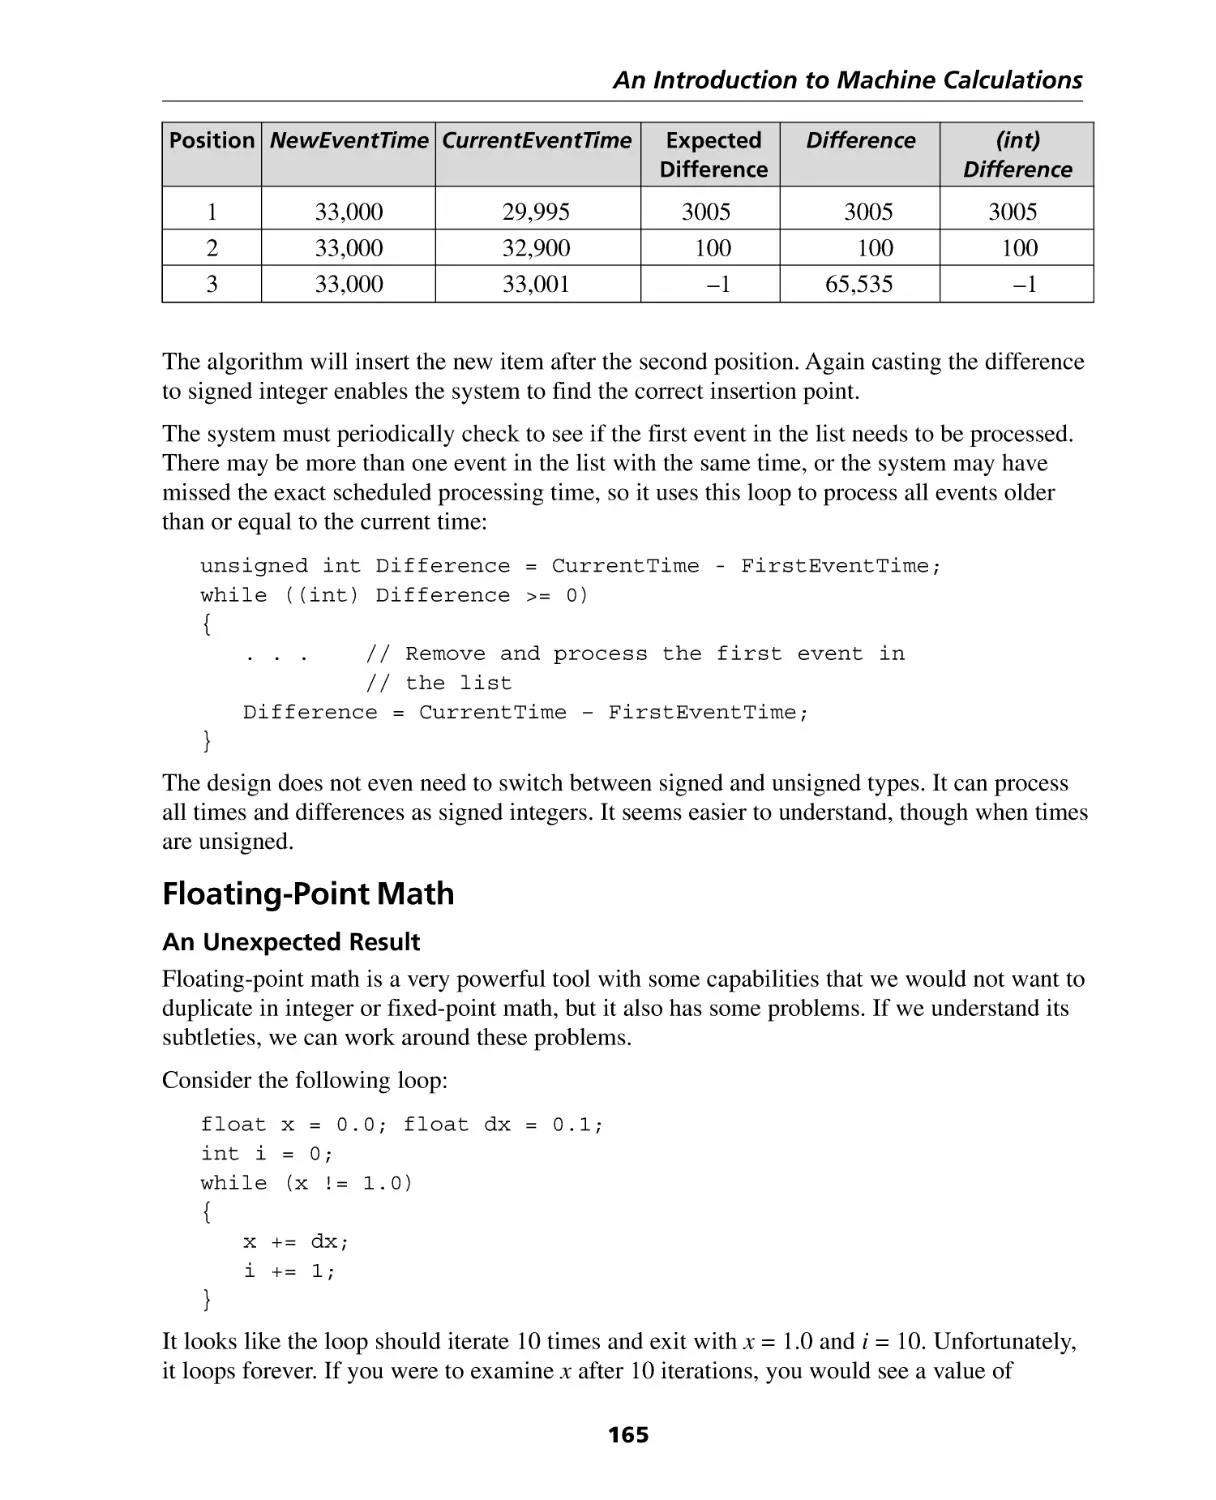 Floating-Point Math